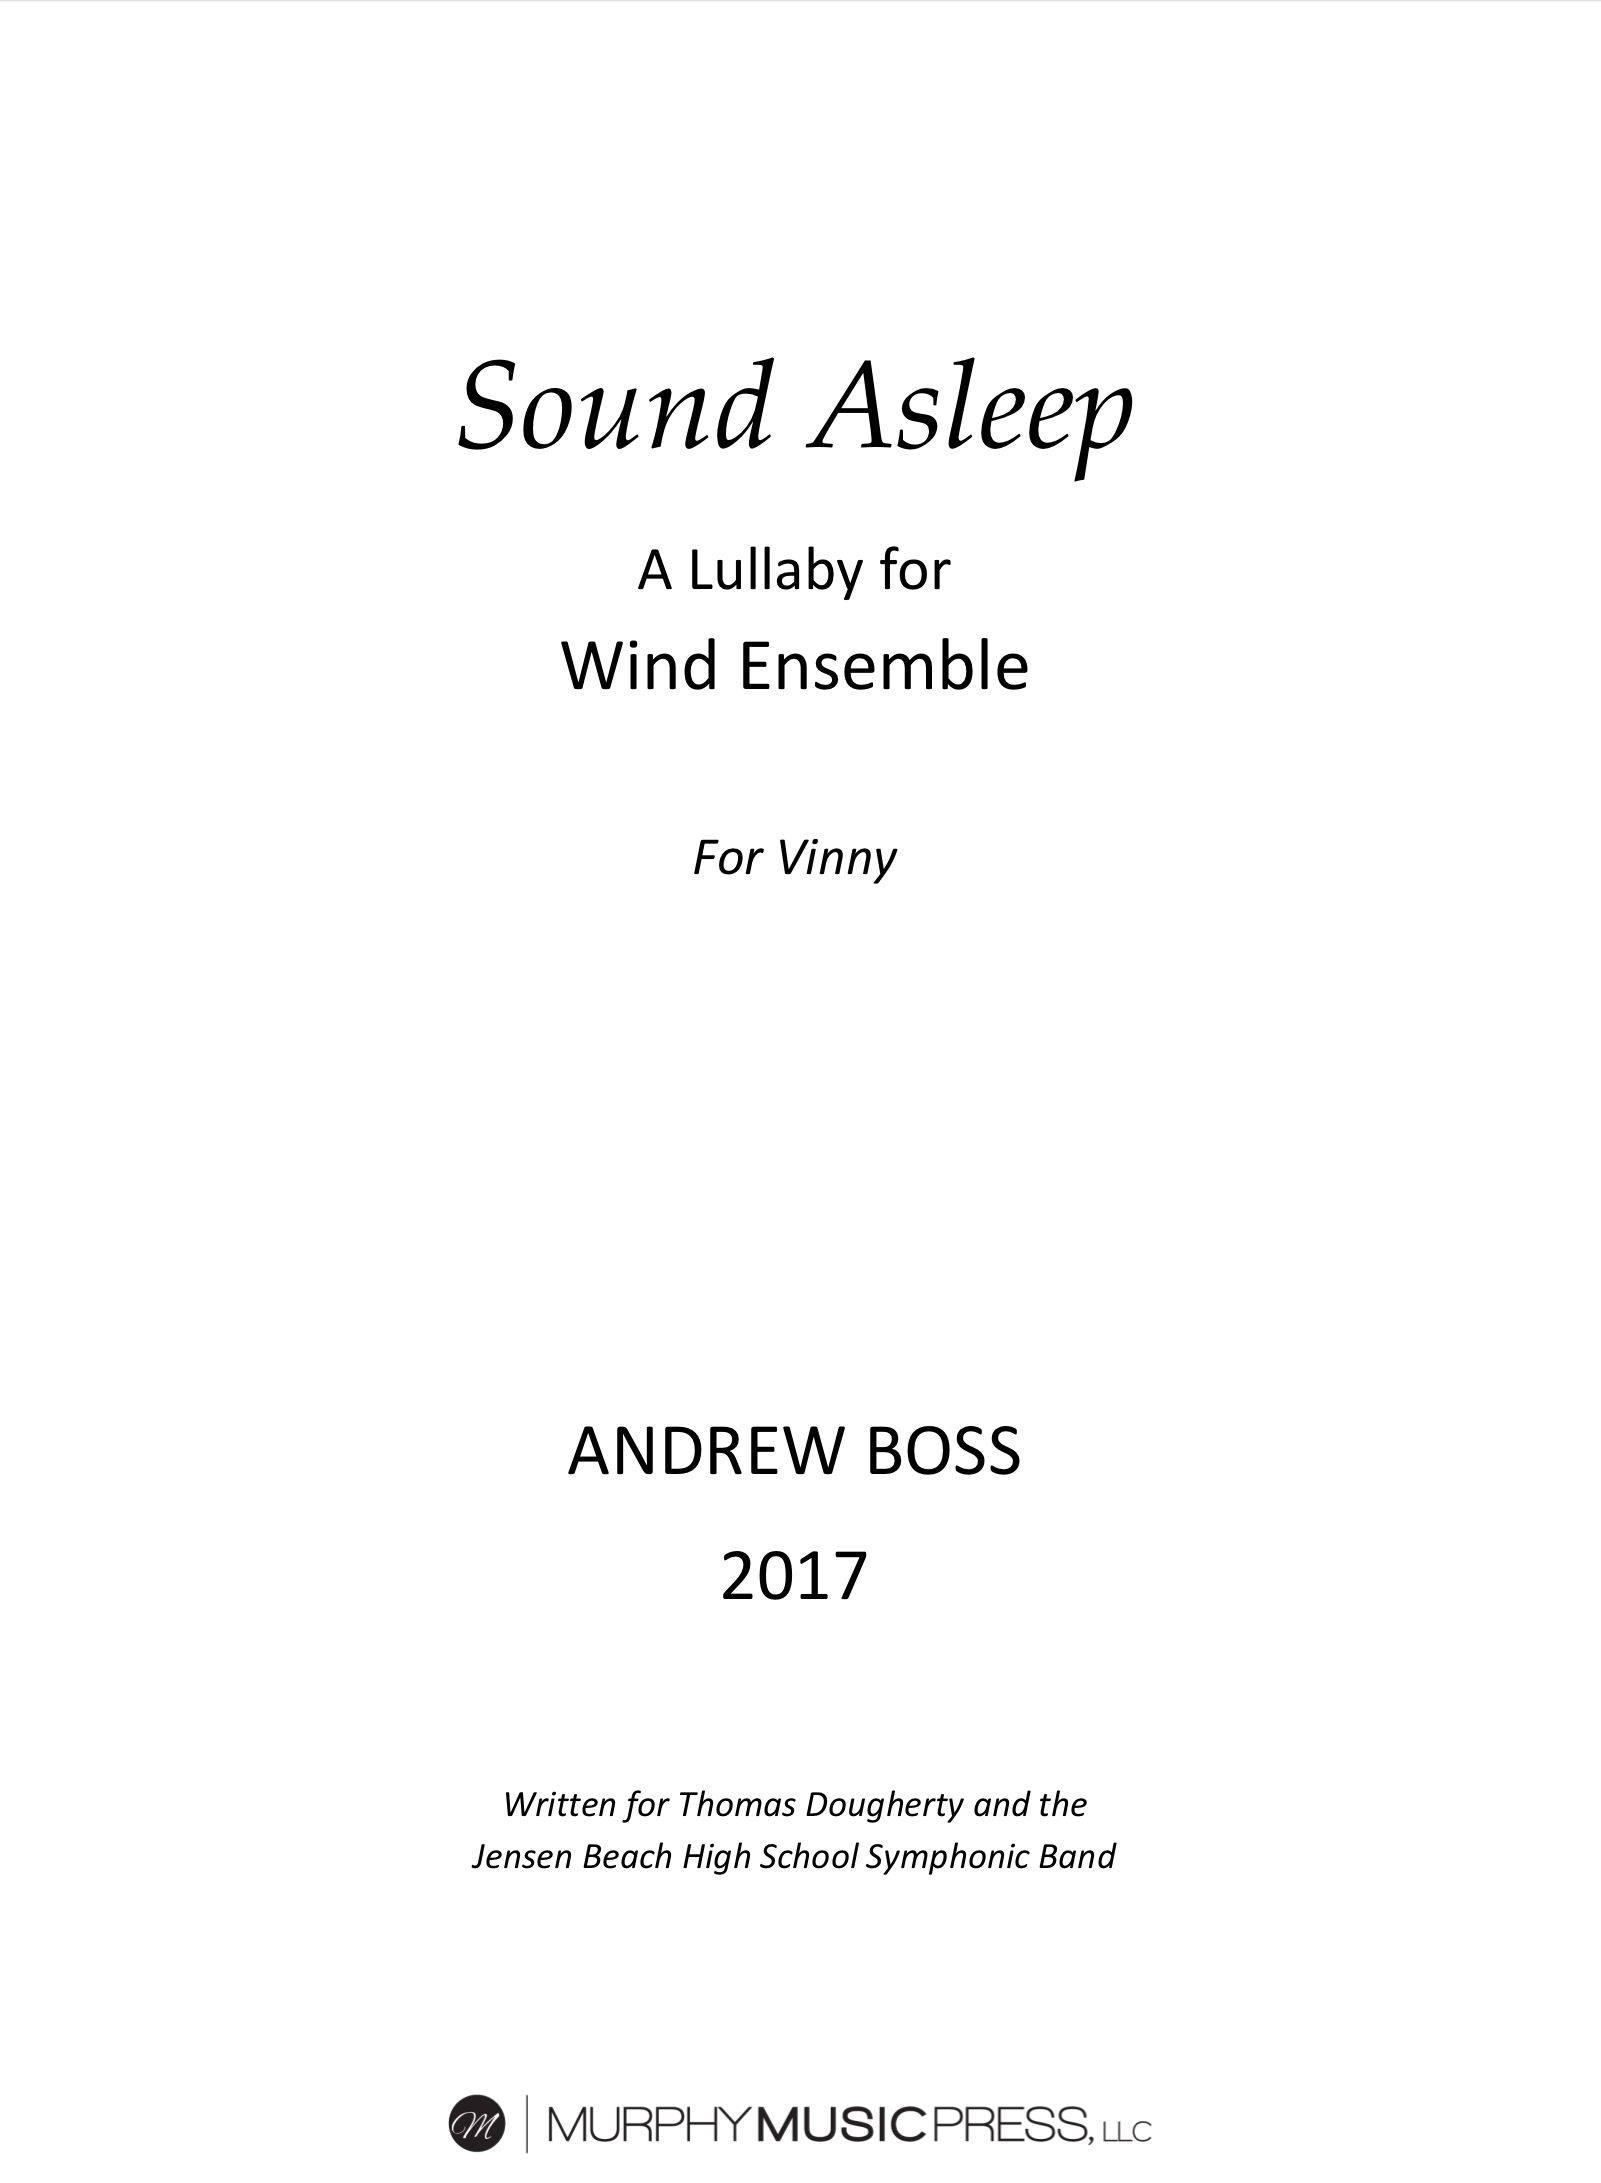 Sound Asleep by Andrew Boss